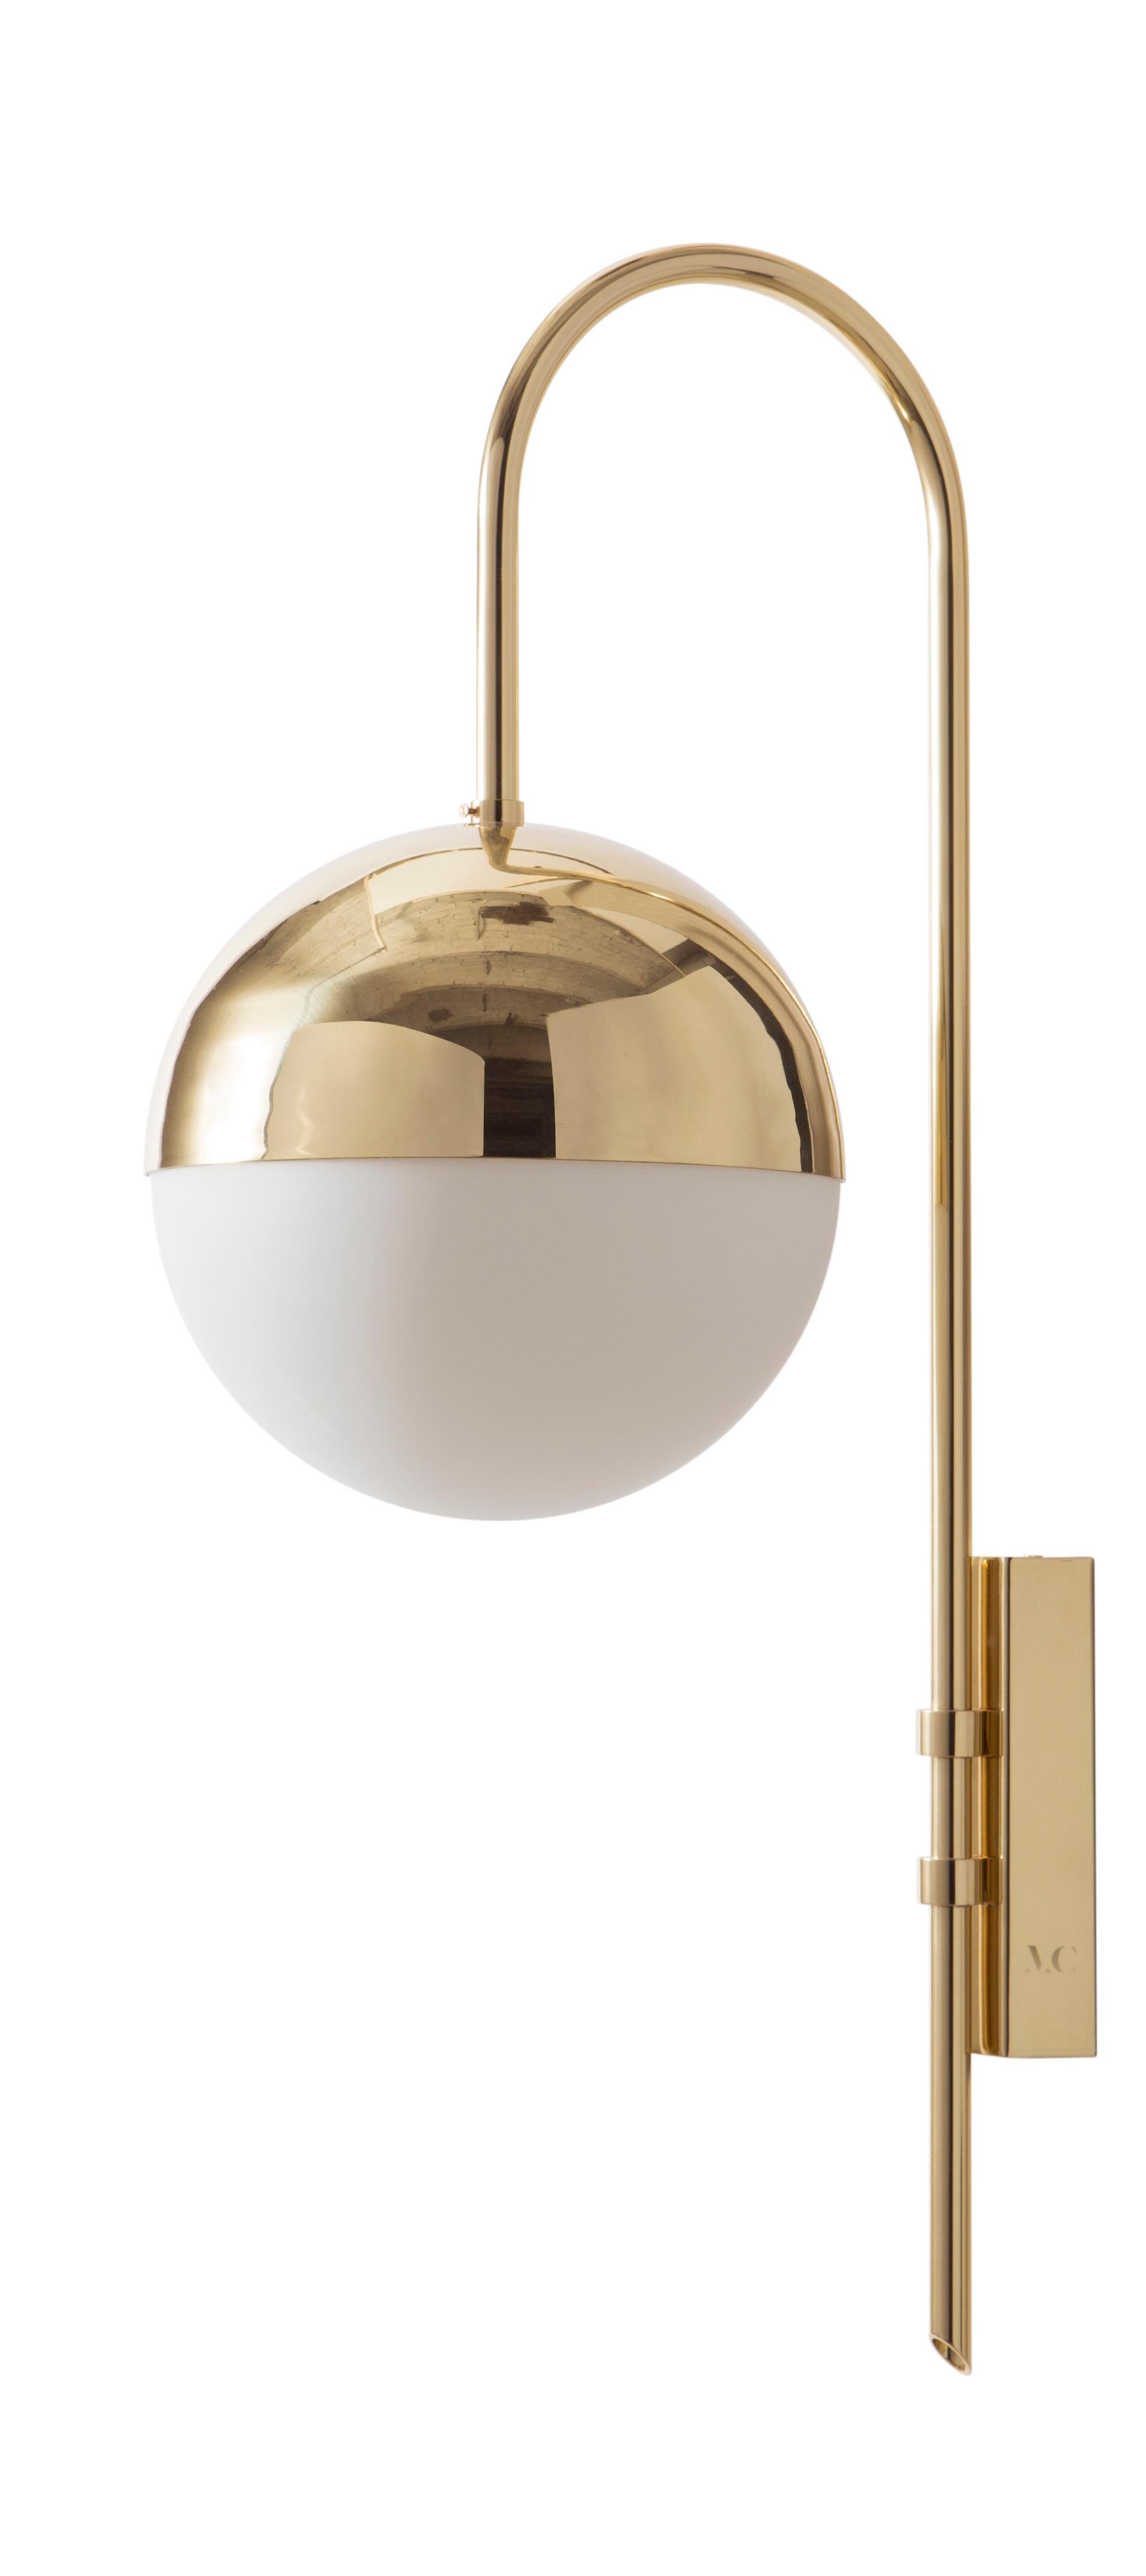 Set of 2 brass wall lamp 01 by Magic Circus Editions.
Dimensions: H 77 x W 25 x D 36.5 cm.
Materials: smooth brass, mouth blown glass.

Available finishes: brass, nickel.
All our lamps can be wired according to each country. If sold to the USA